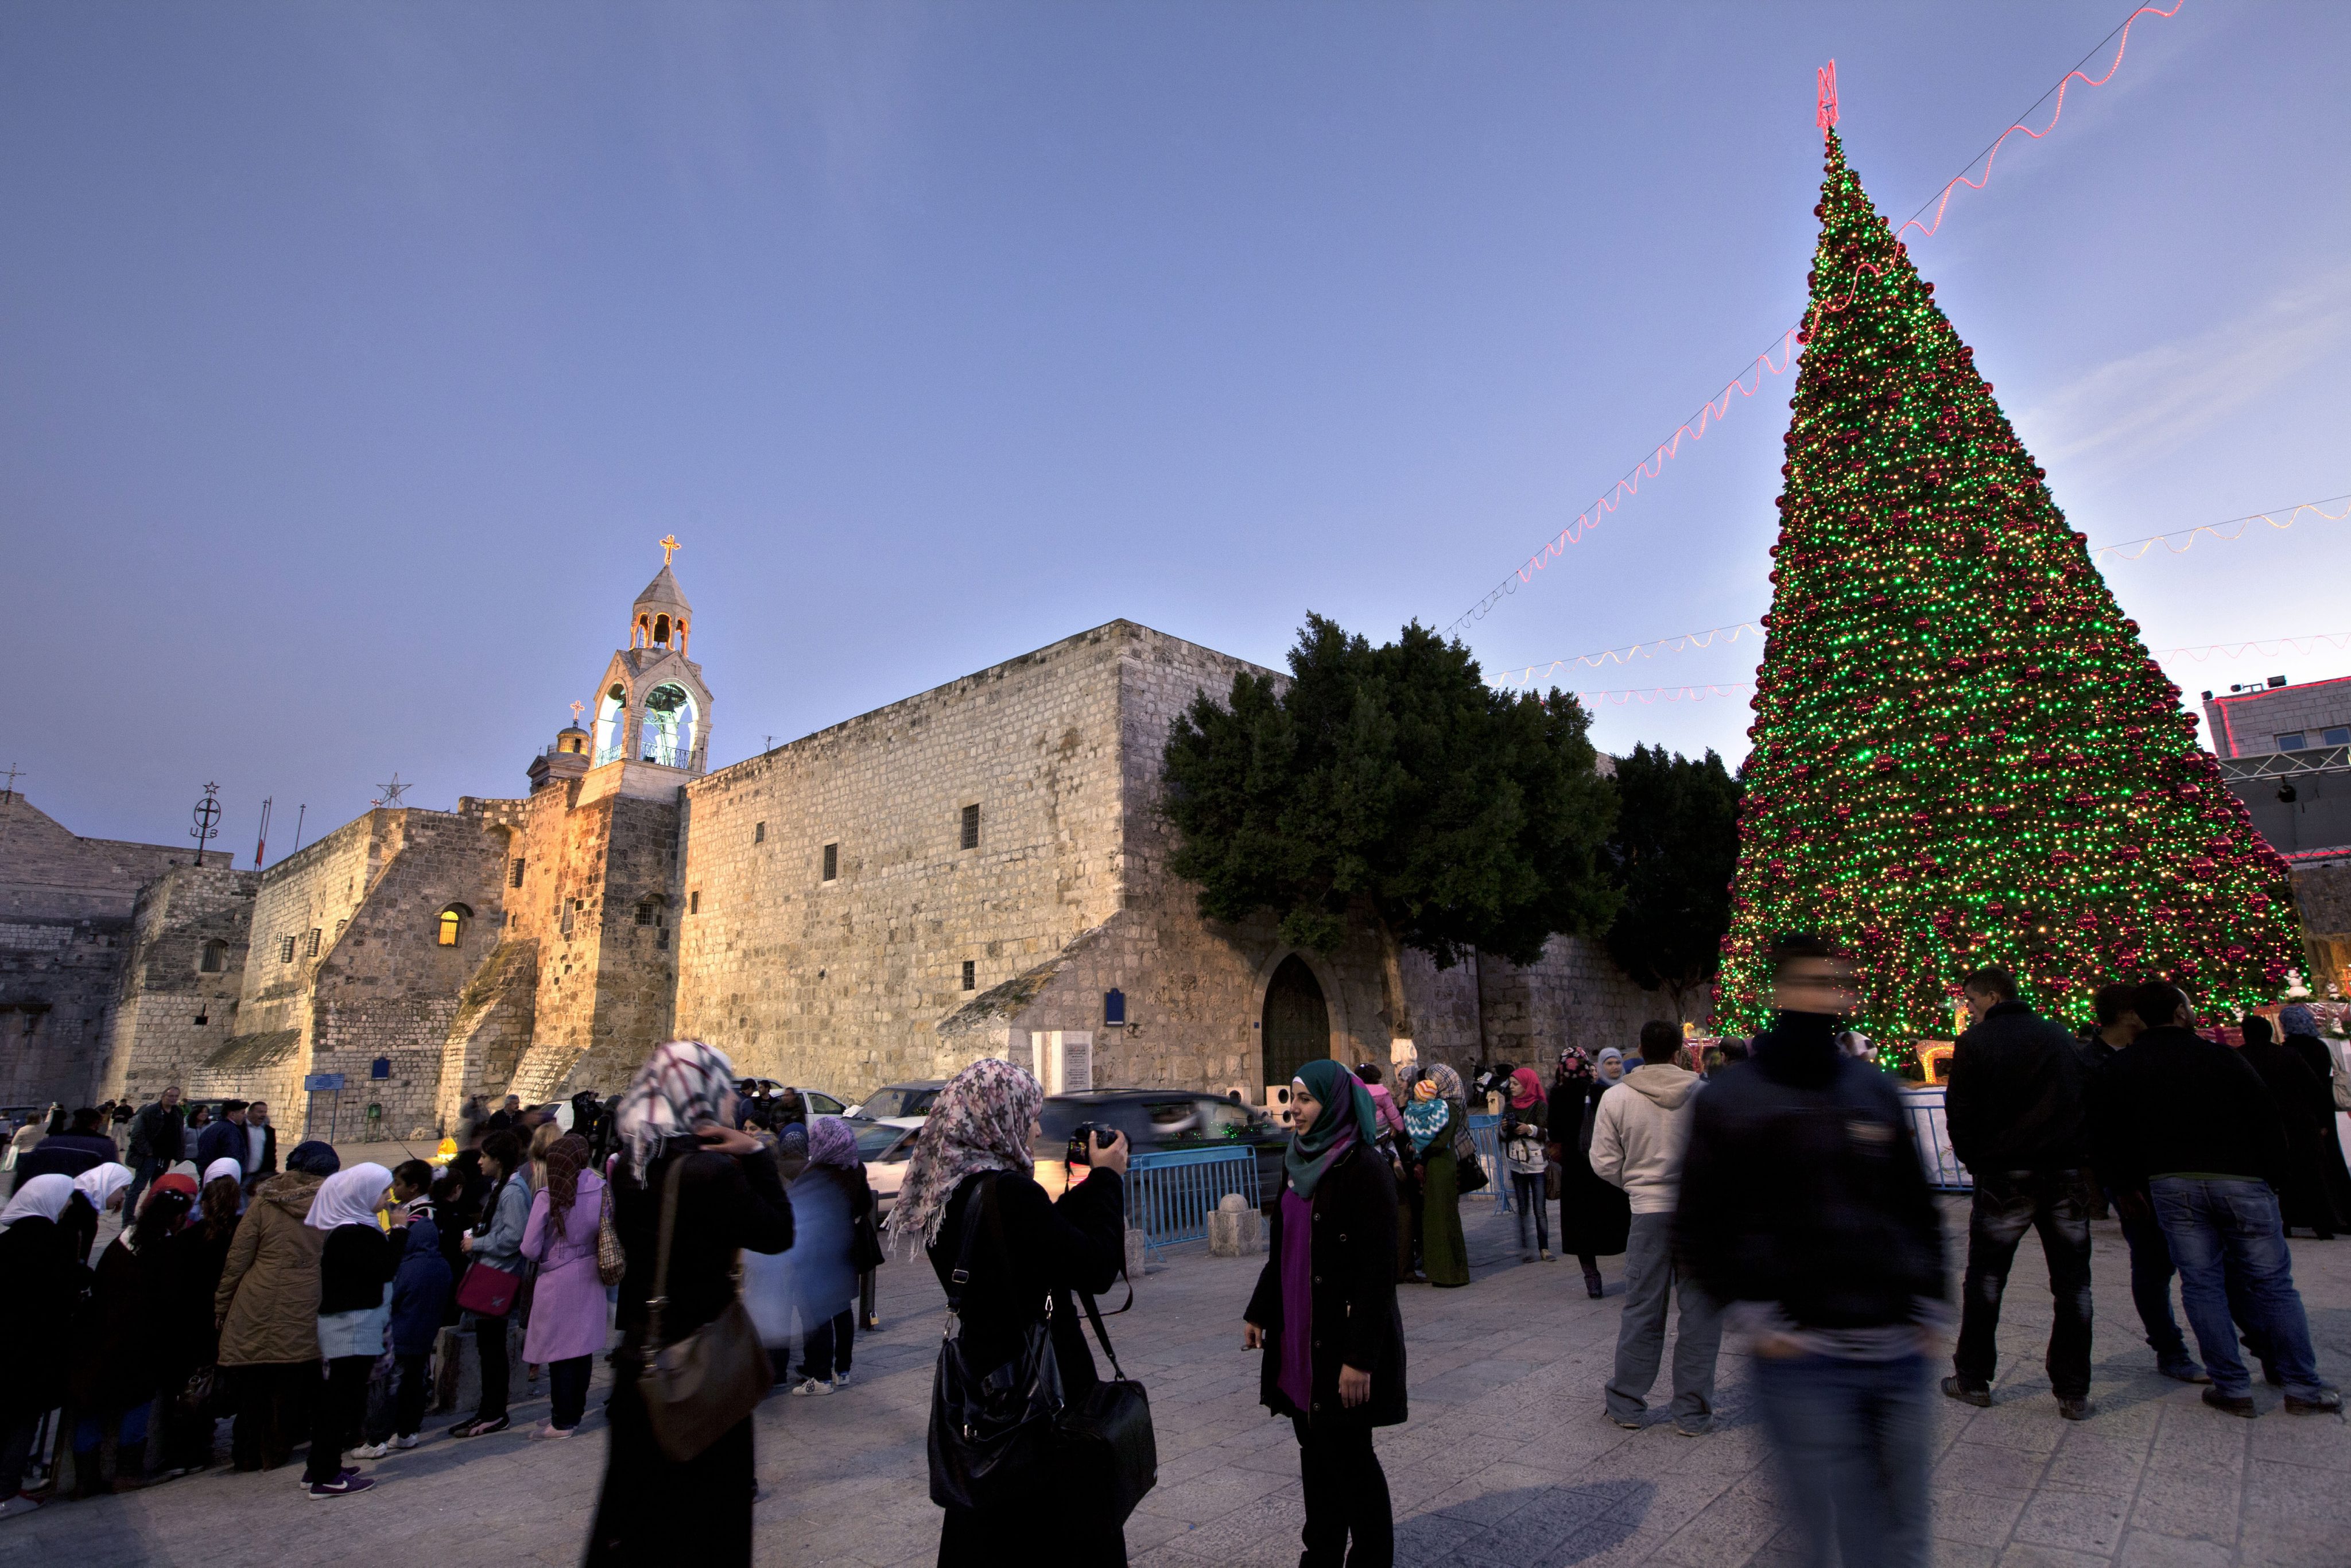 The 'fanfare' of the giant tree and lights has been stopped according to officials